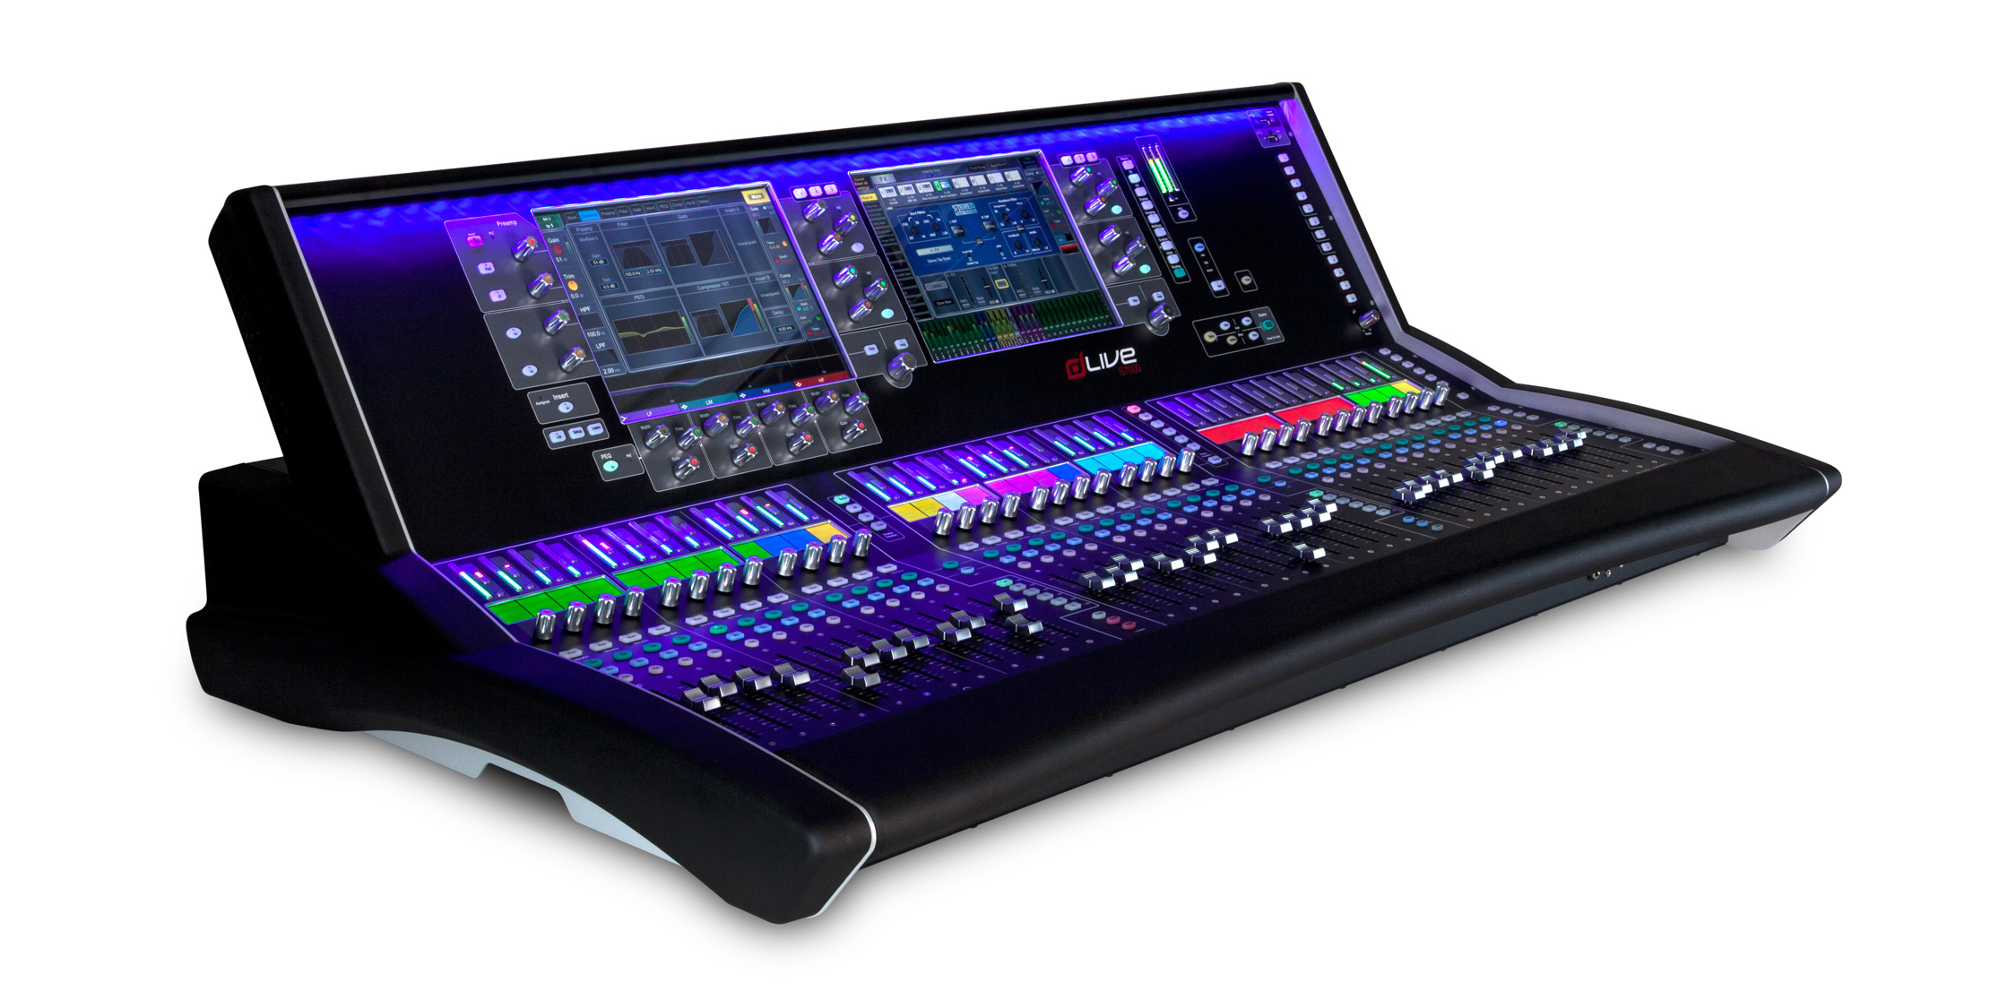 Allen Heath S7000 S Class 36 Fader Control Surface With Dual 12 Touchscreens Full Compass Systems